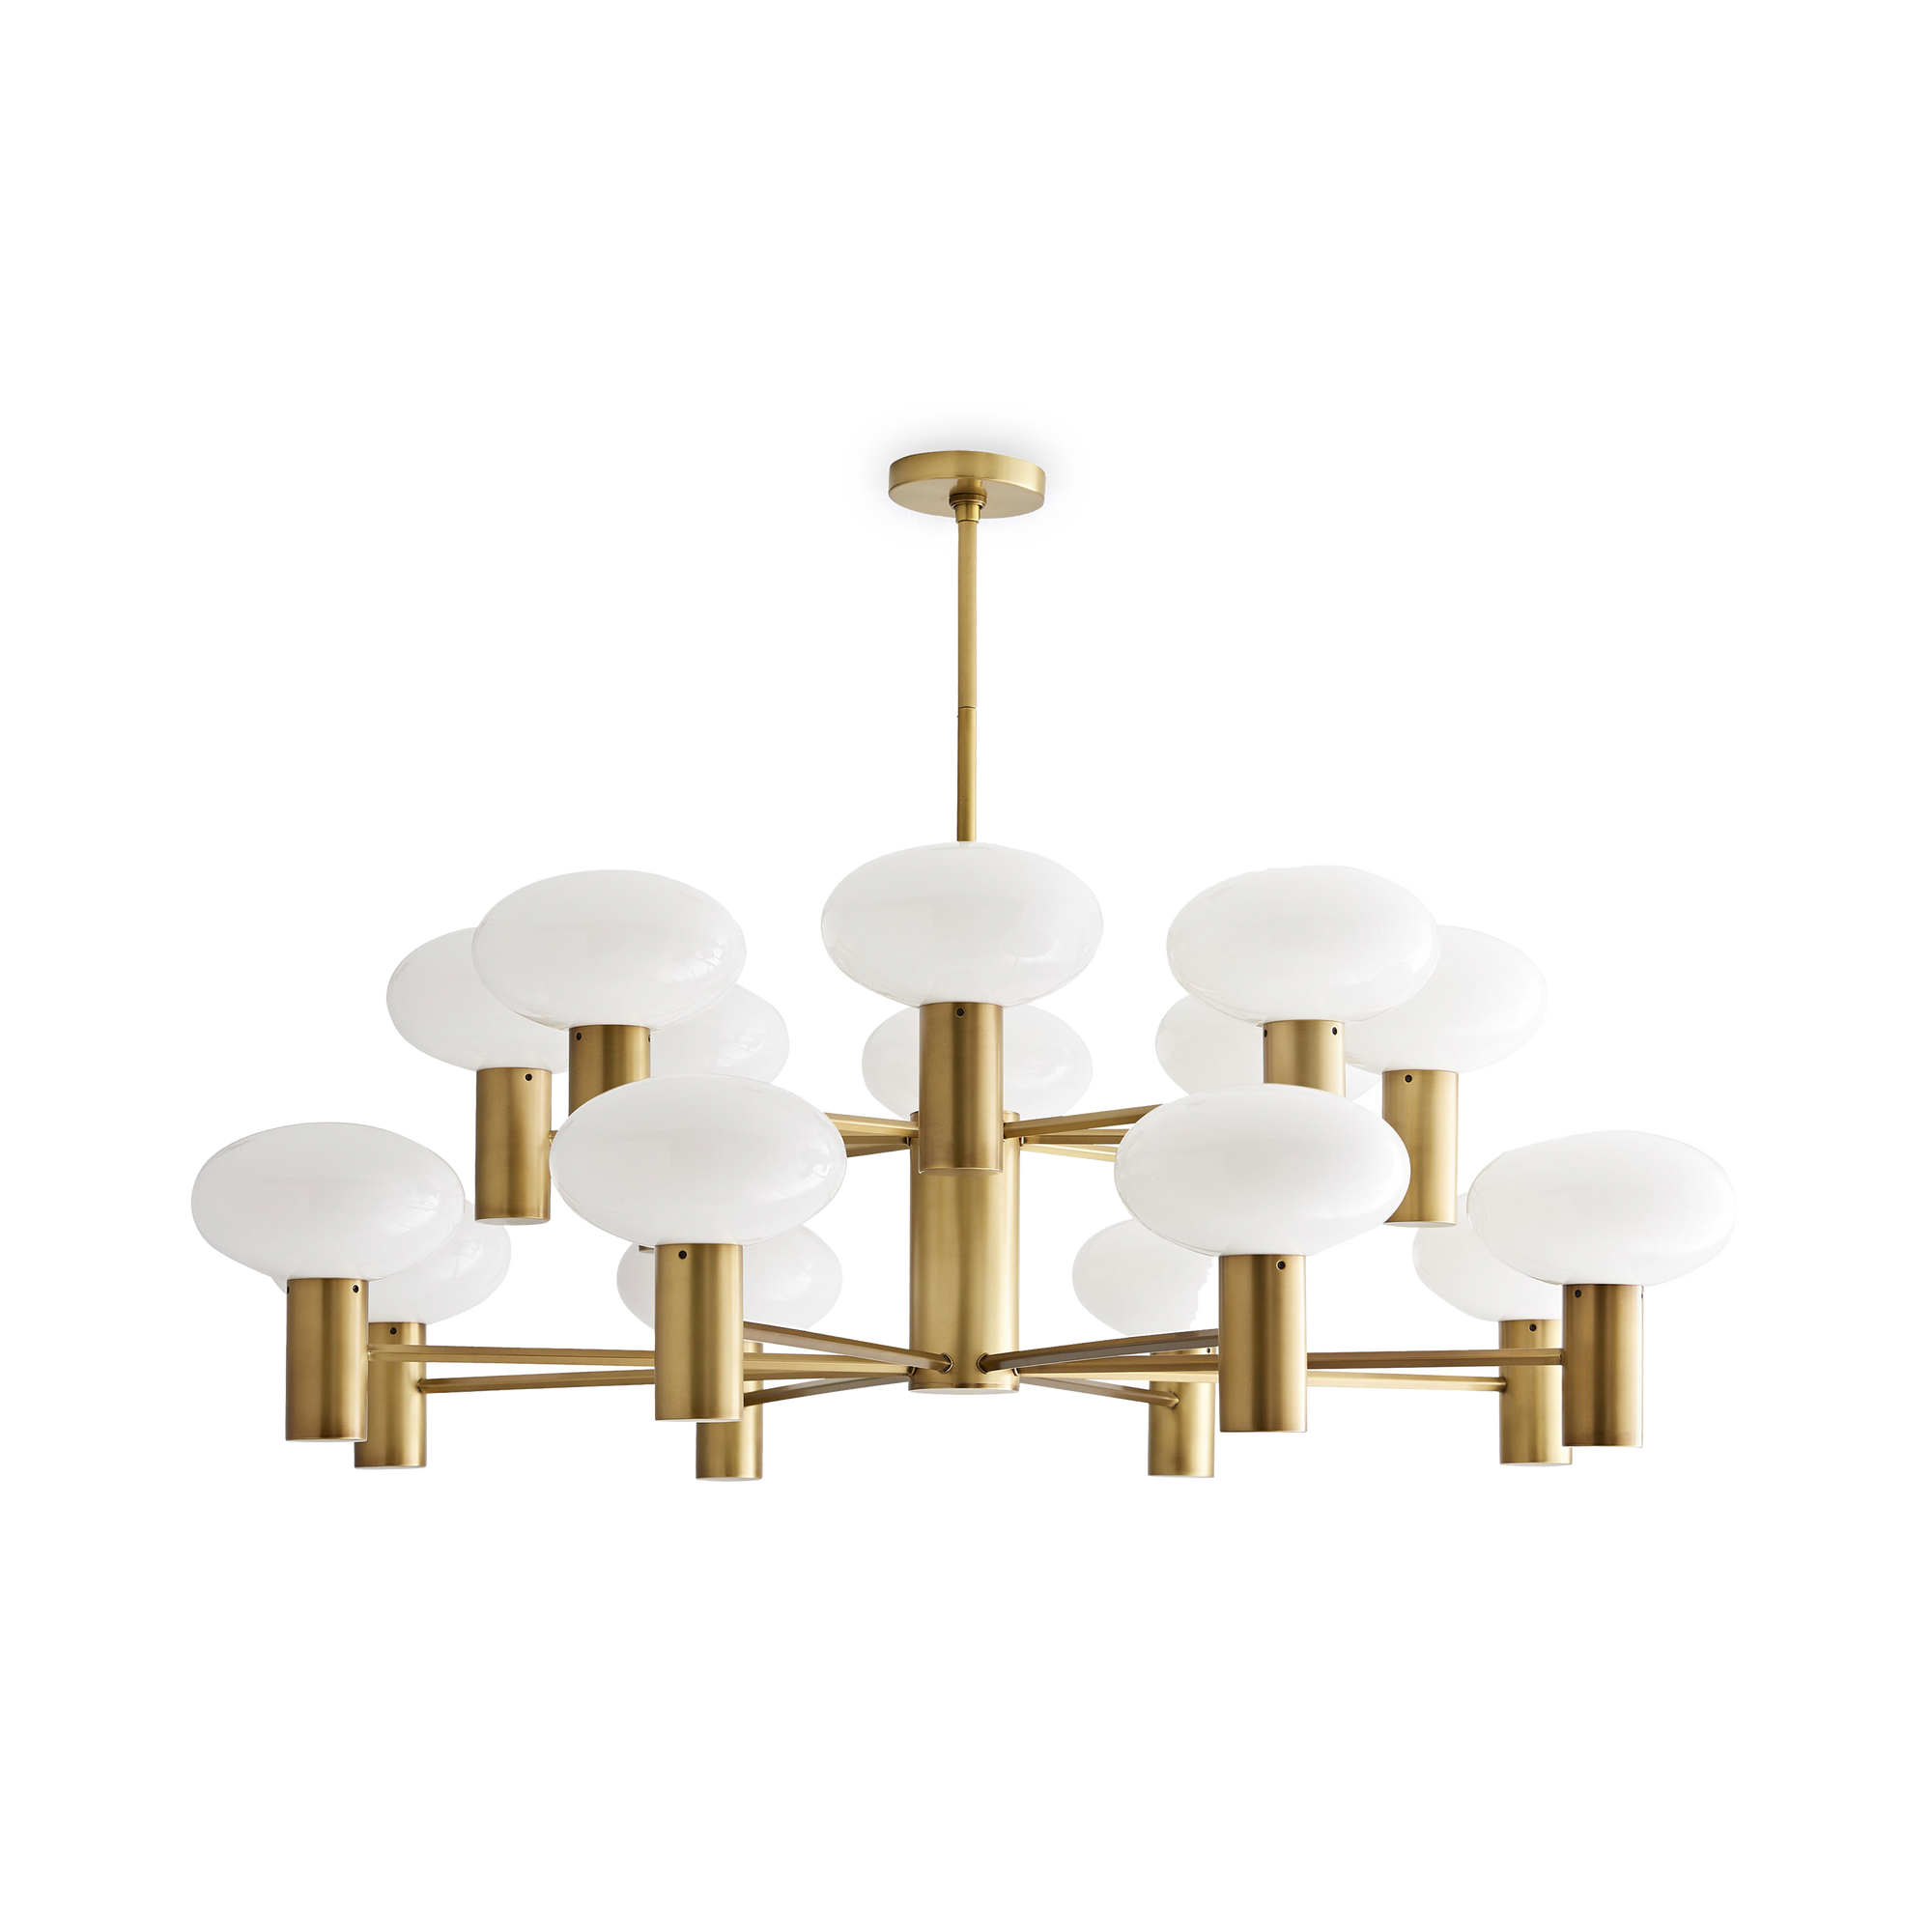 Finished in antique brass, the cylindrical center features several slender arms that spider out in a diamond-like formation to showcase sixteen mushroom-shaped opal glass globes.